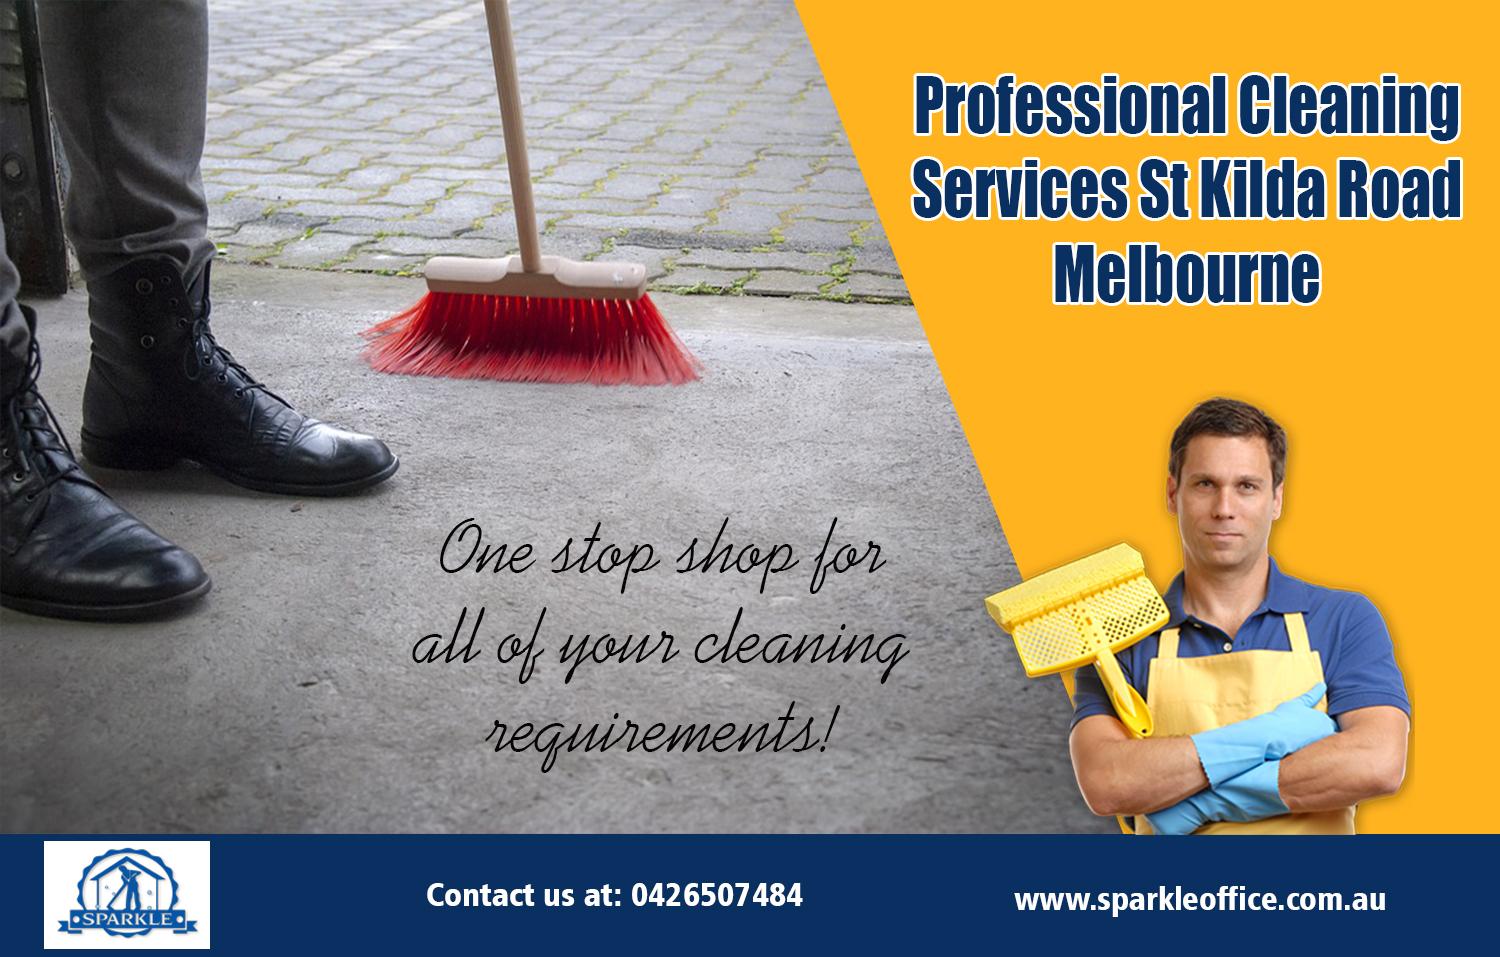 Professional Cleaning Services St Kilda Road Melbourne